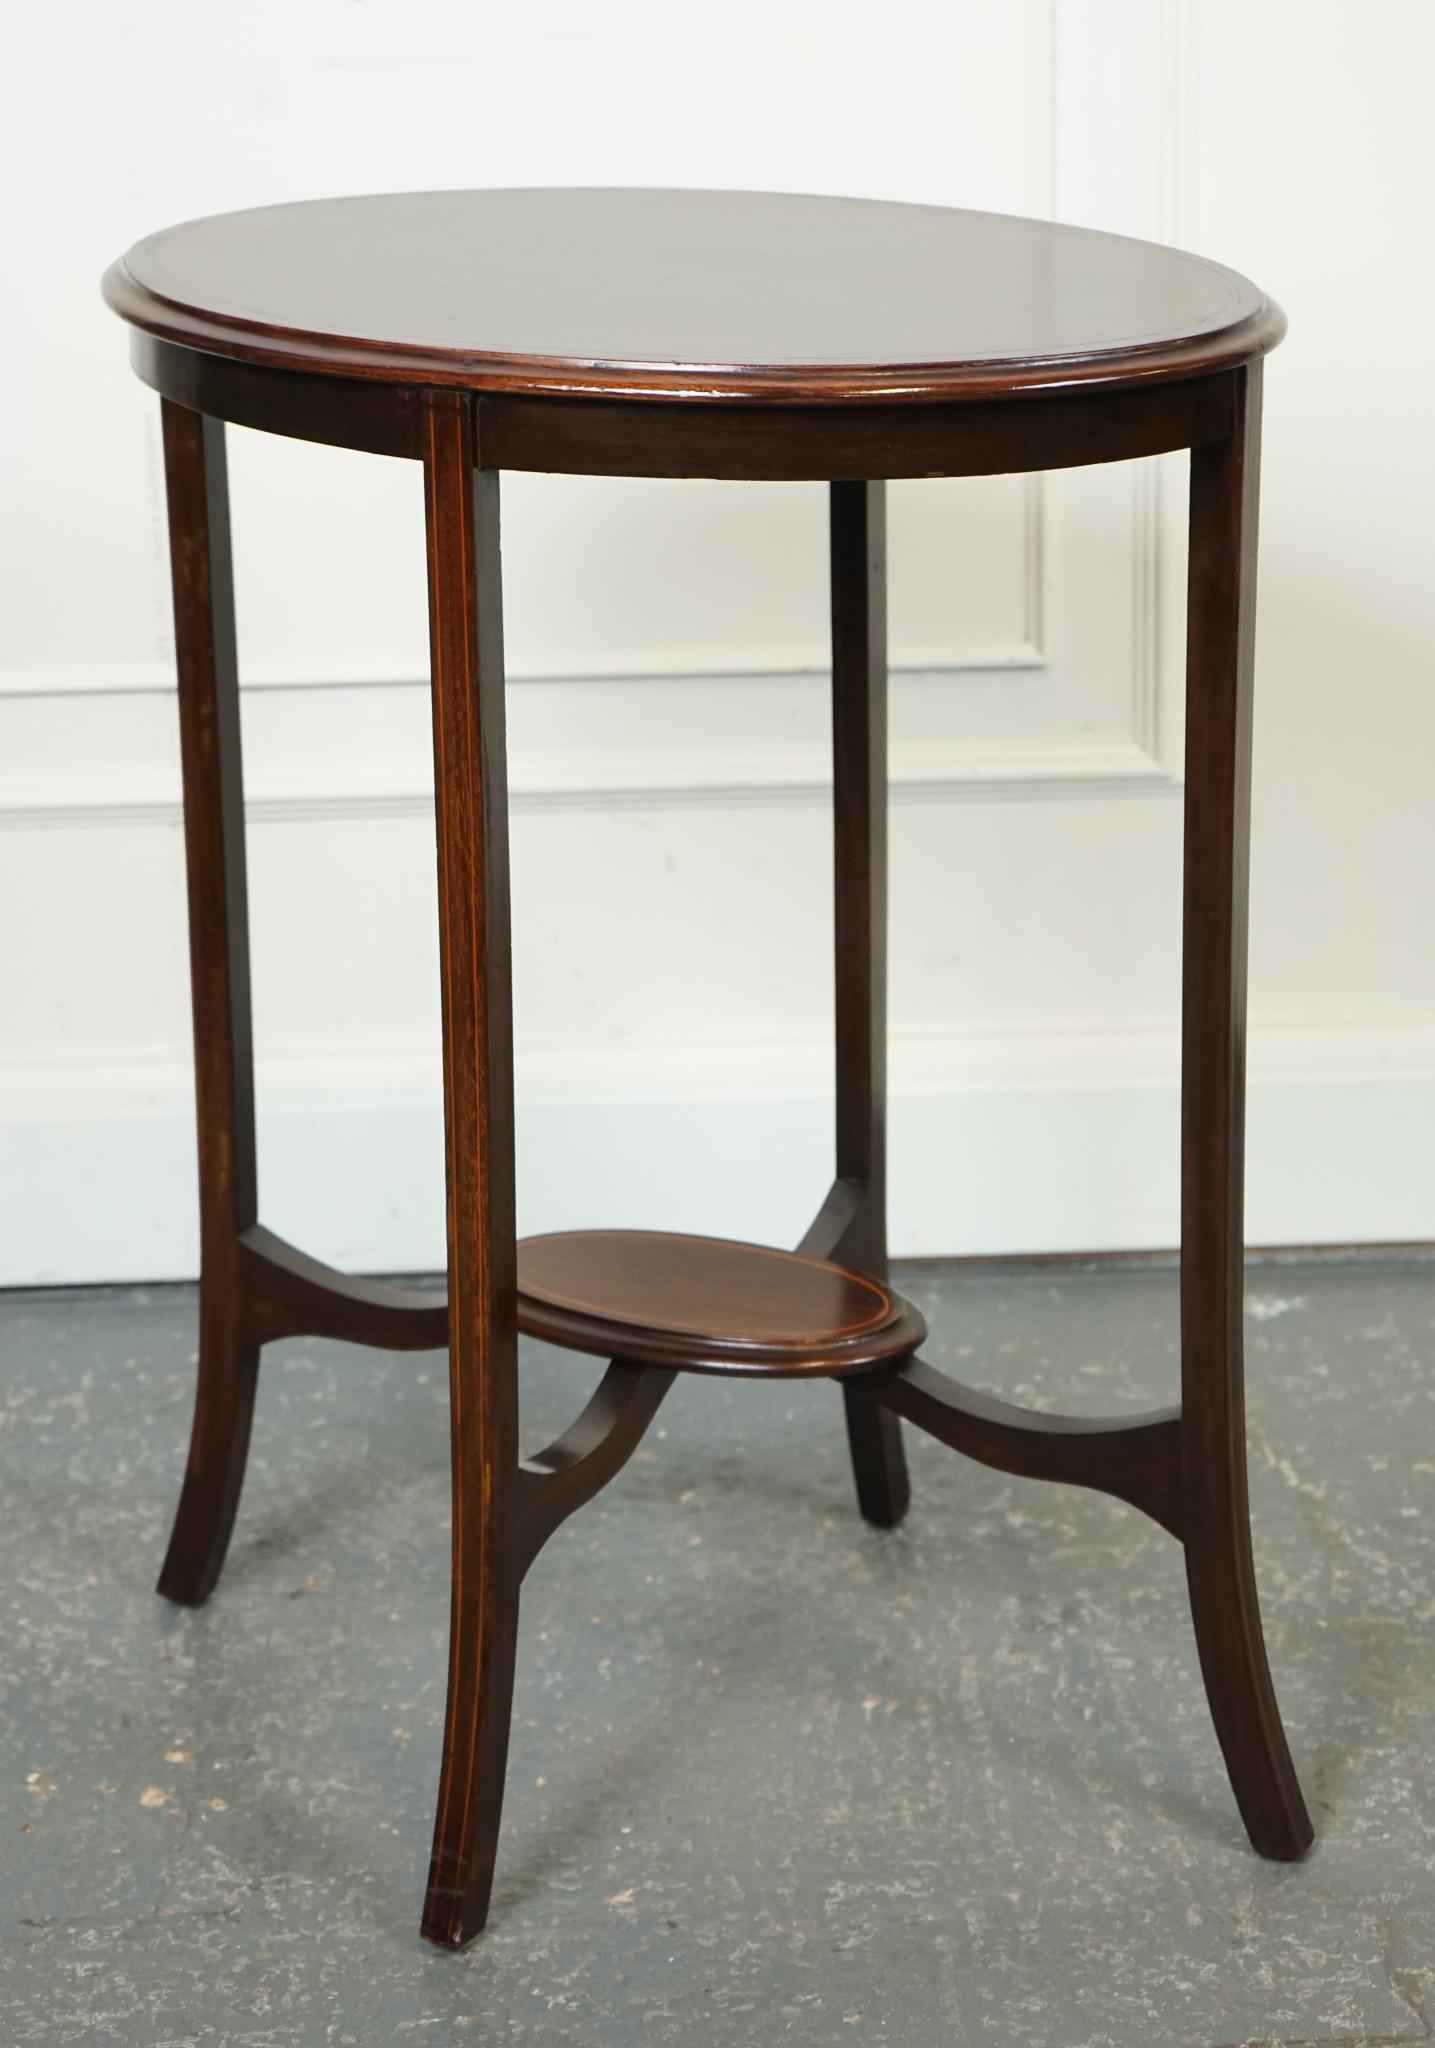 

We are delighted to offer for sale this Lovely Oval Hardwood Side Plant Table.

Please carefully examine the pictures to see the condition before purchasing, as they form part of the description. If you have any questions, please message us.